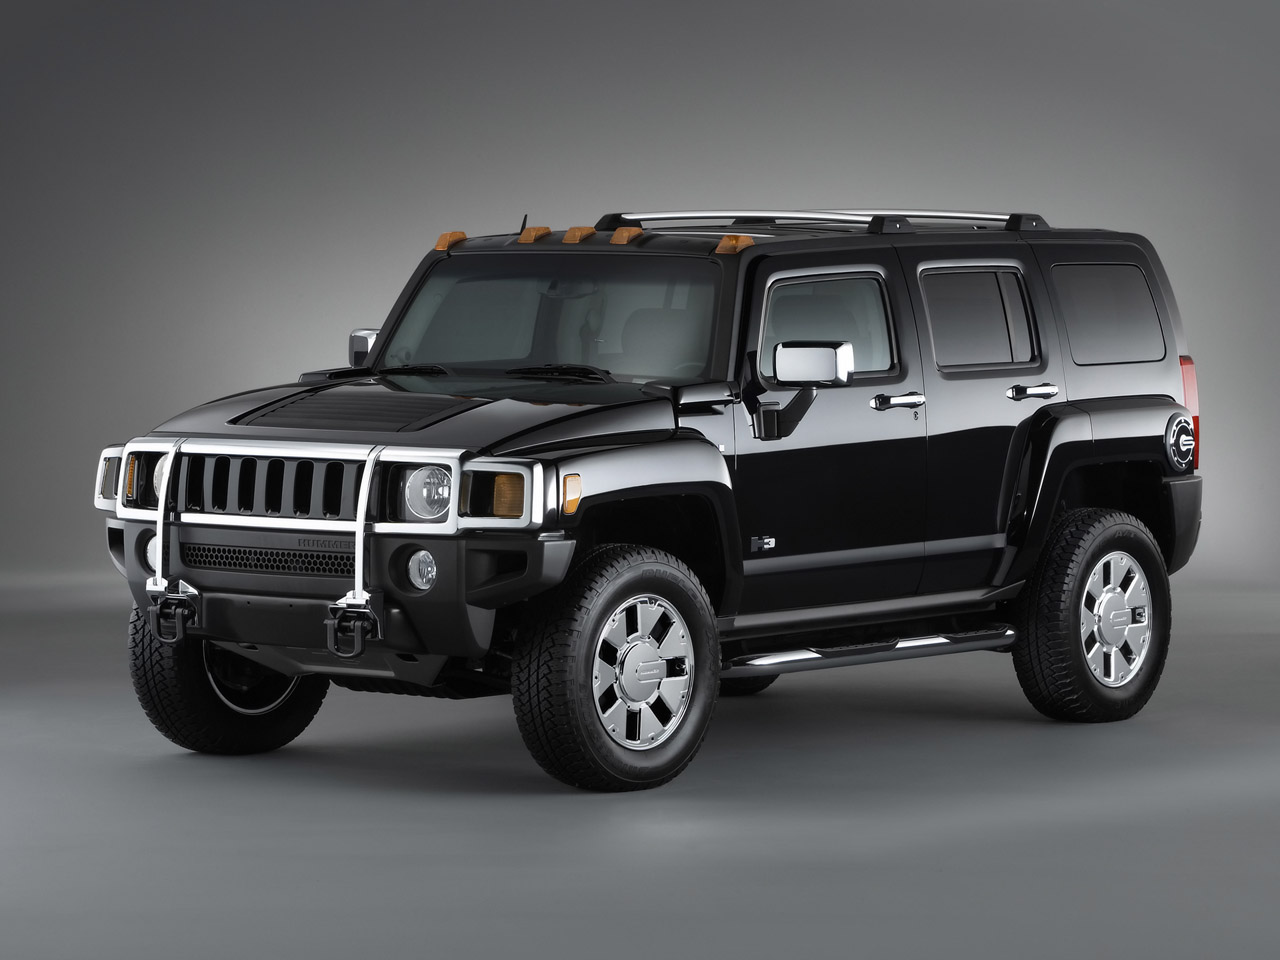 4X4 Hummer Reviews: Hummer H3 Luxury Sport Review